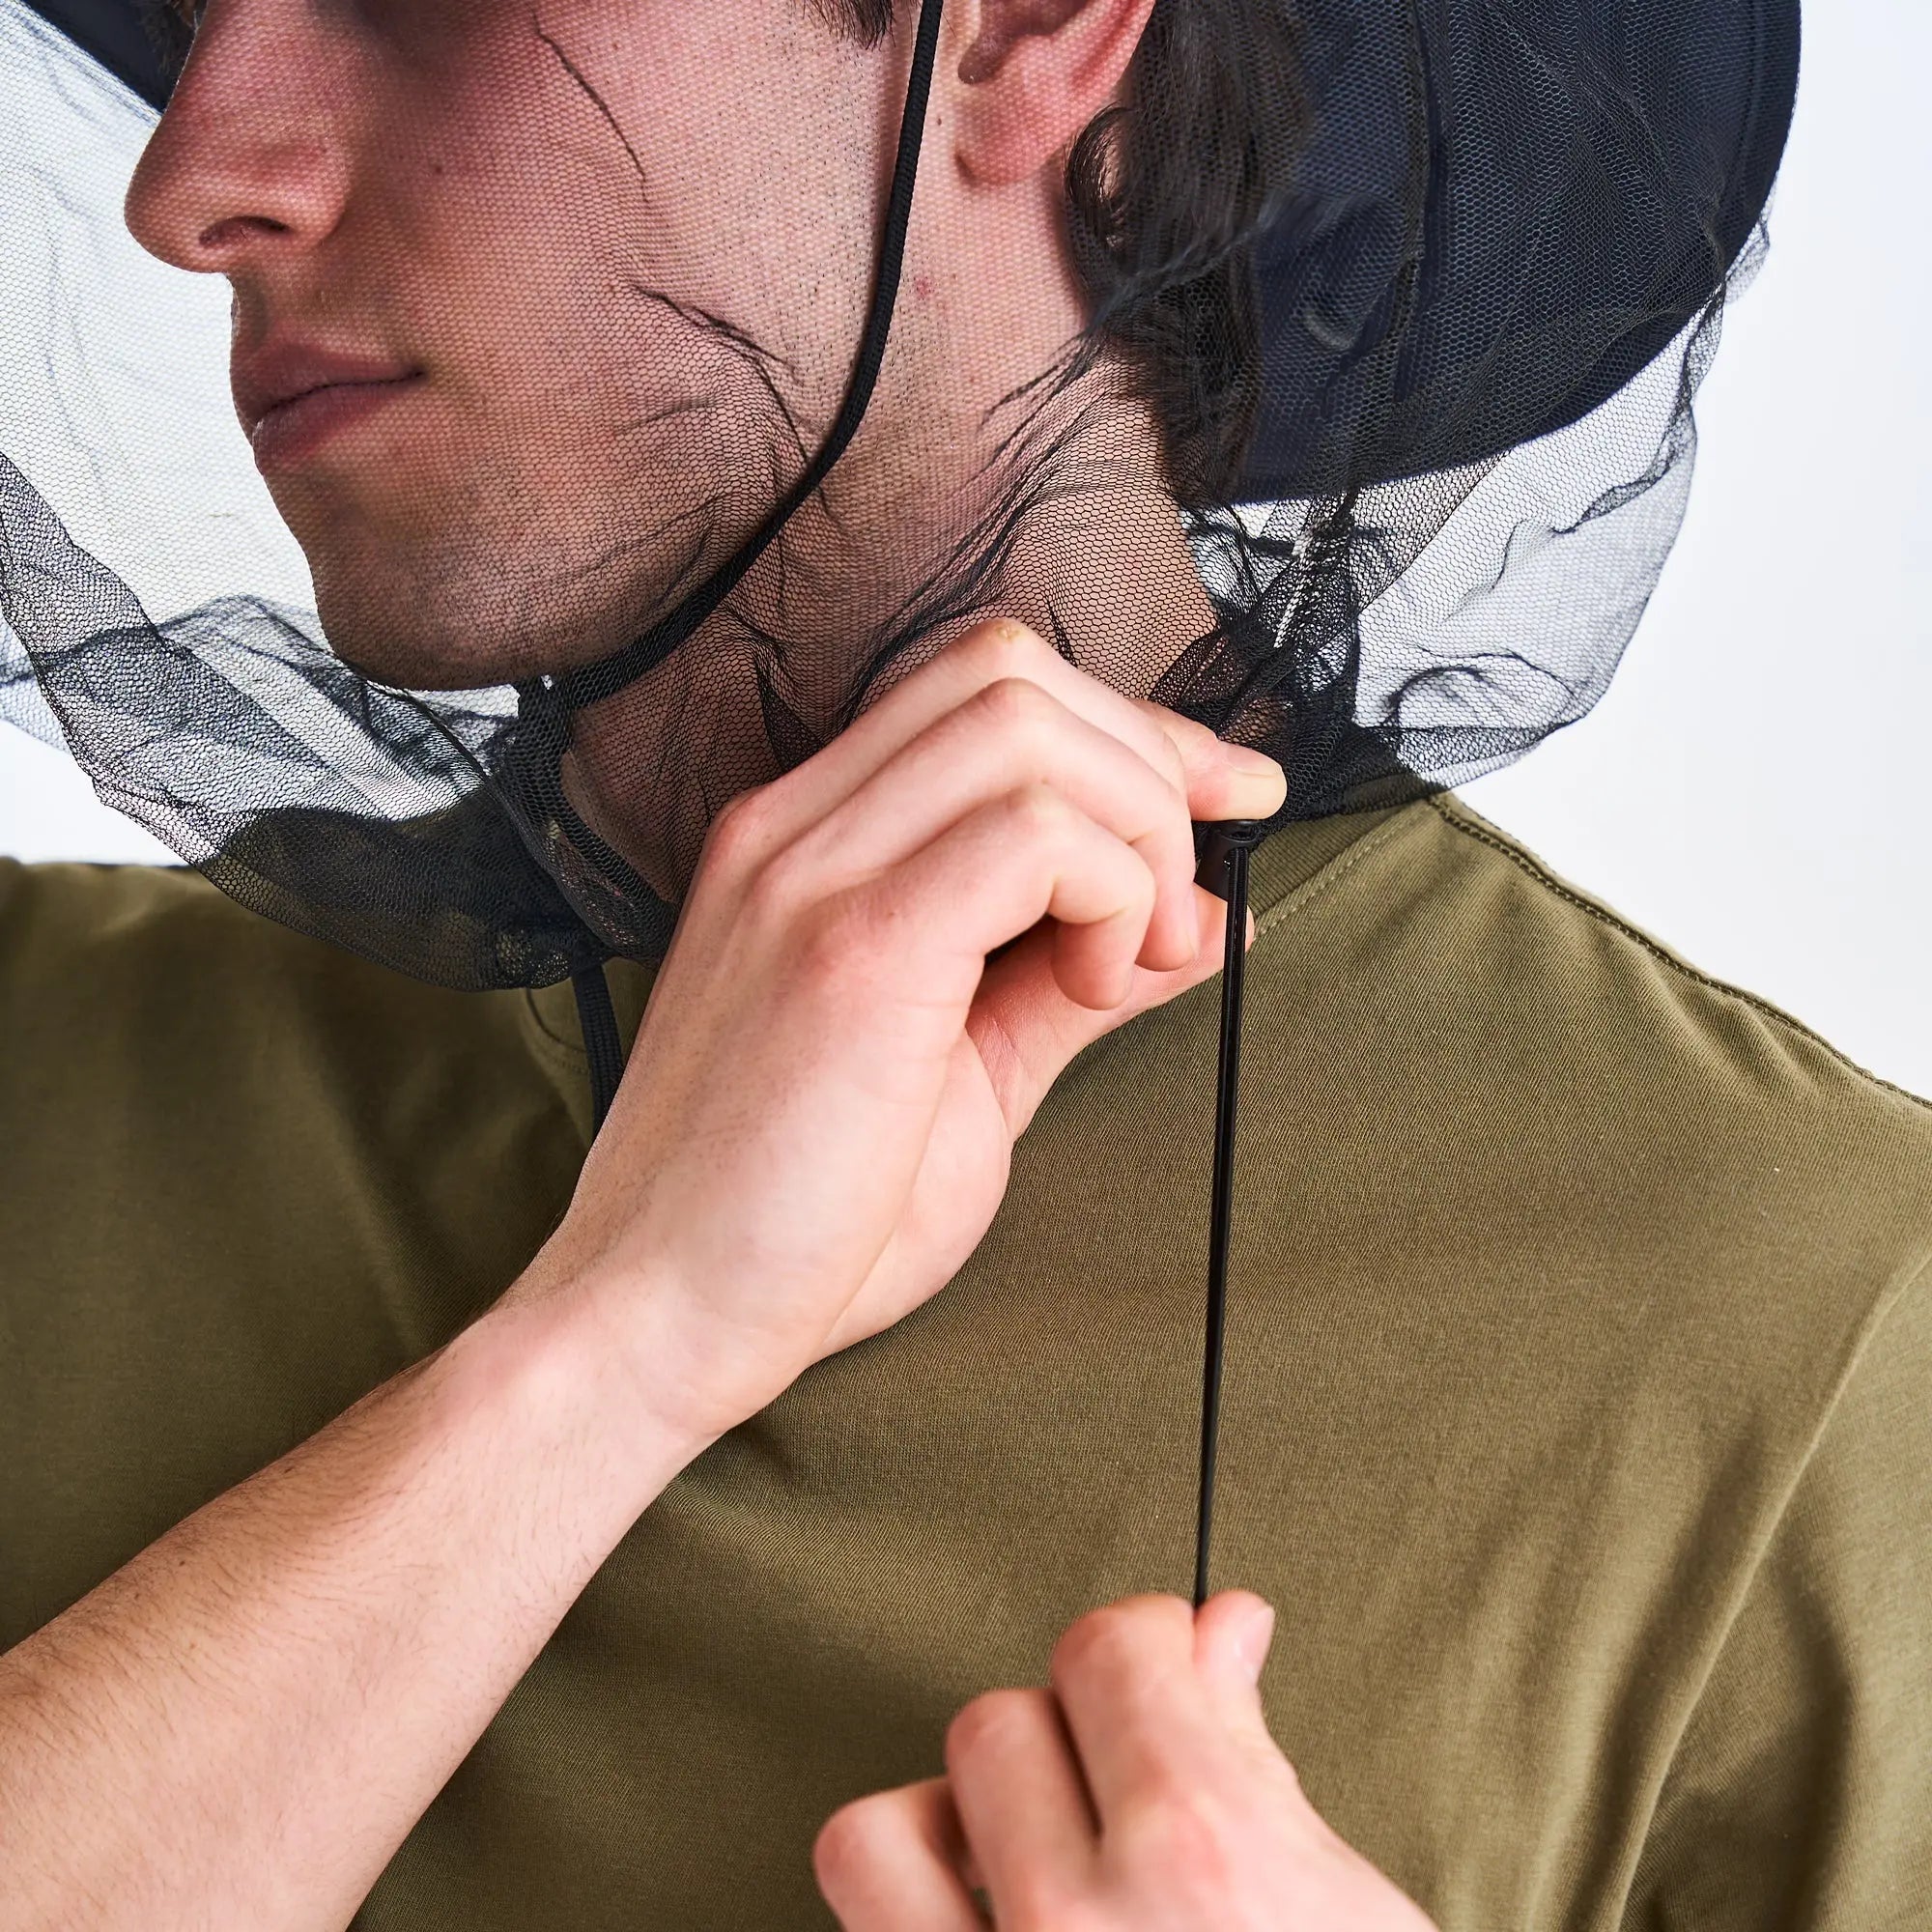 Coghlan's Compact Mosquito Head Net Lightweight w/ Storage Pouch, Mesh 220 Holes Coghlan's